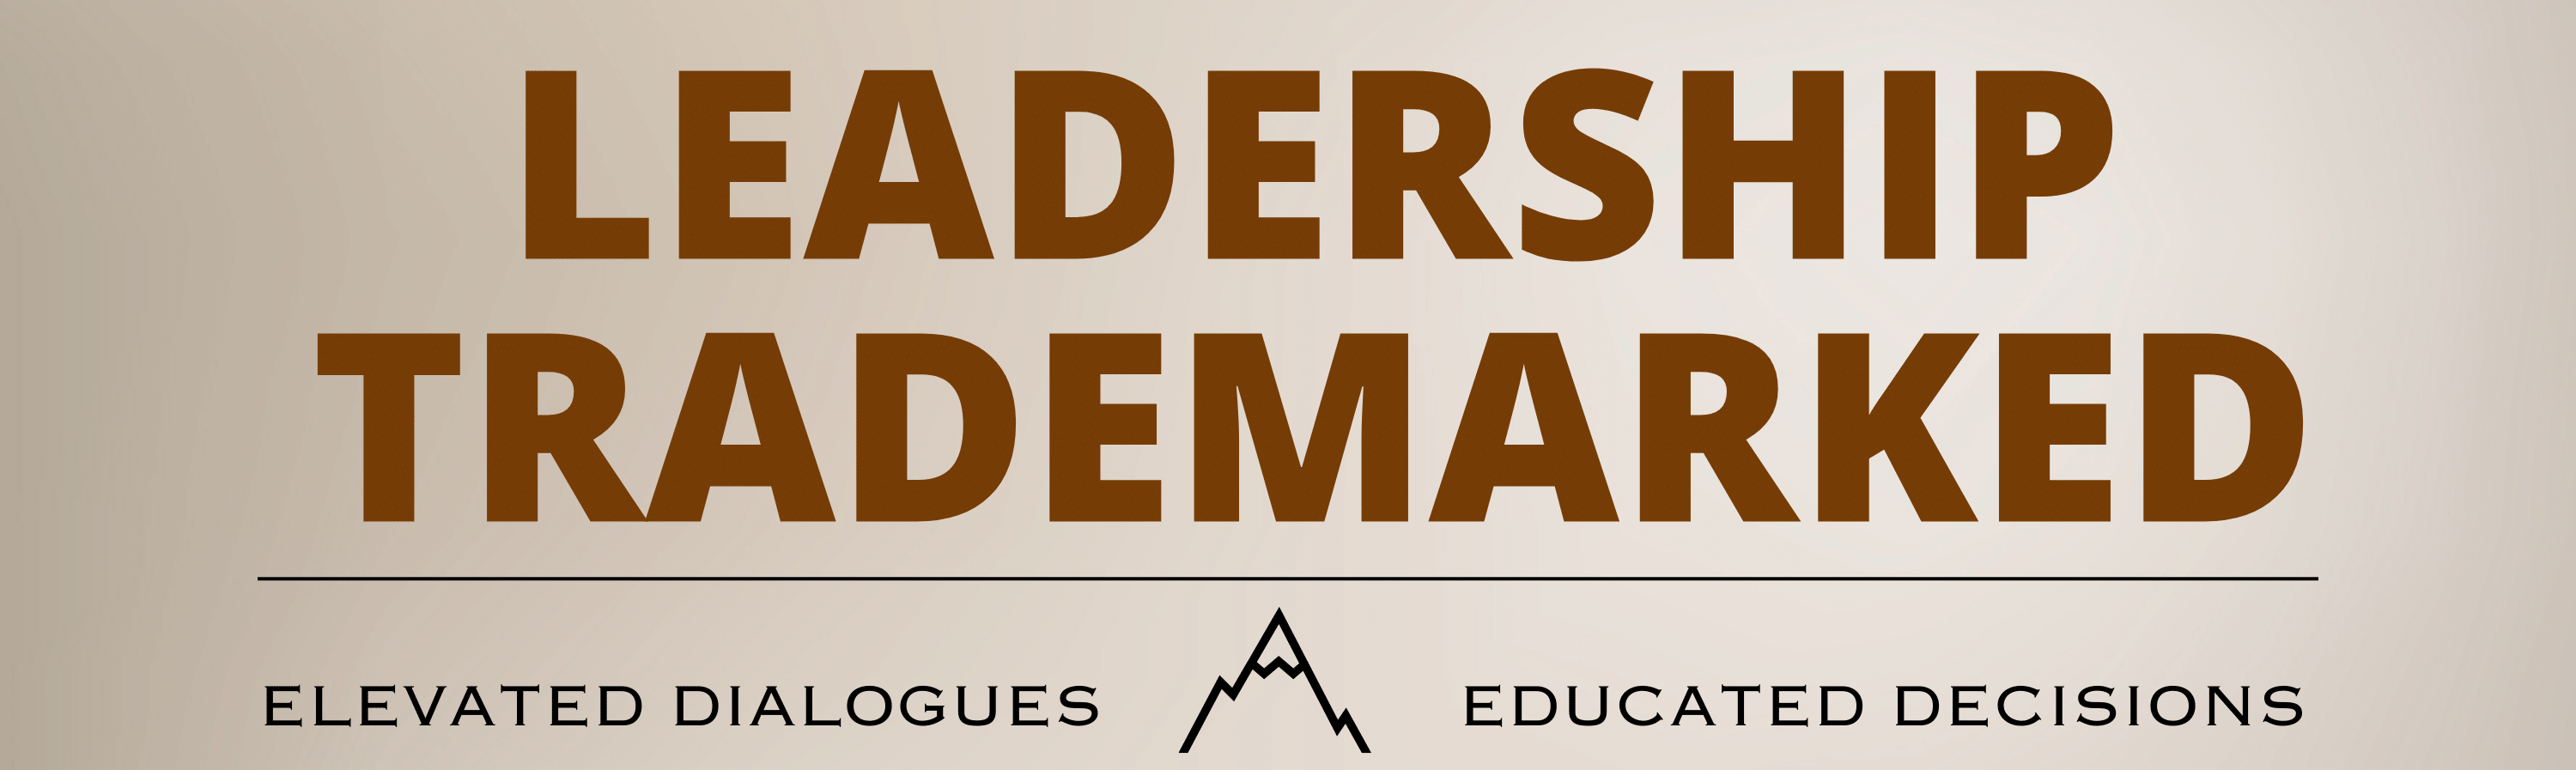 Leadership Trademarked Podcast